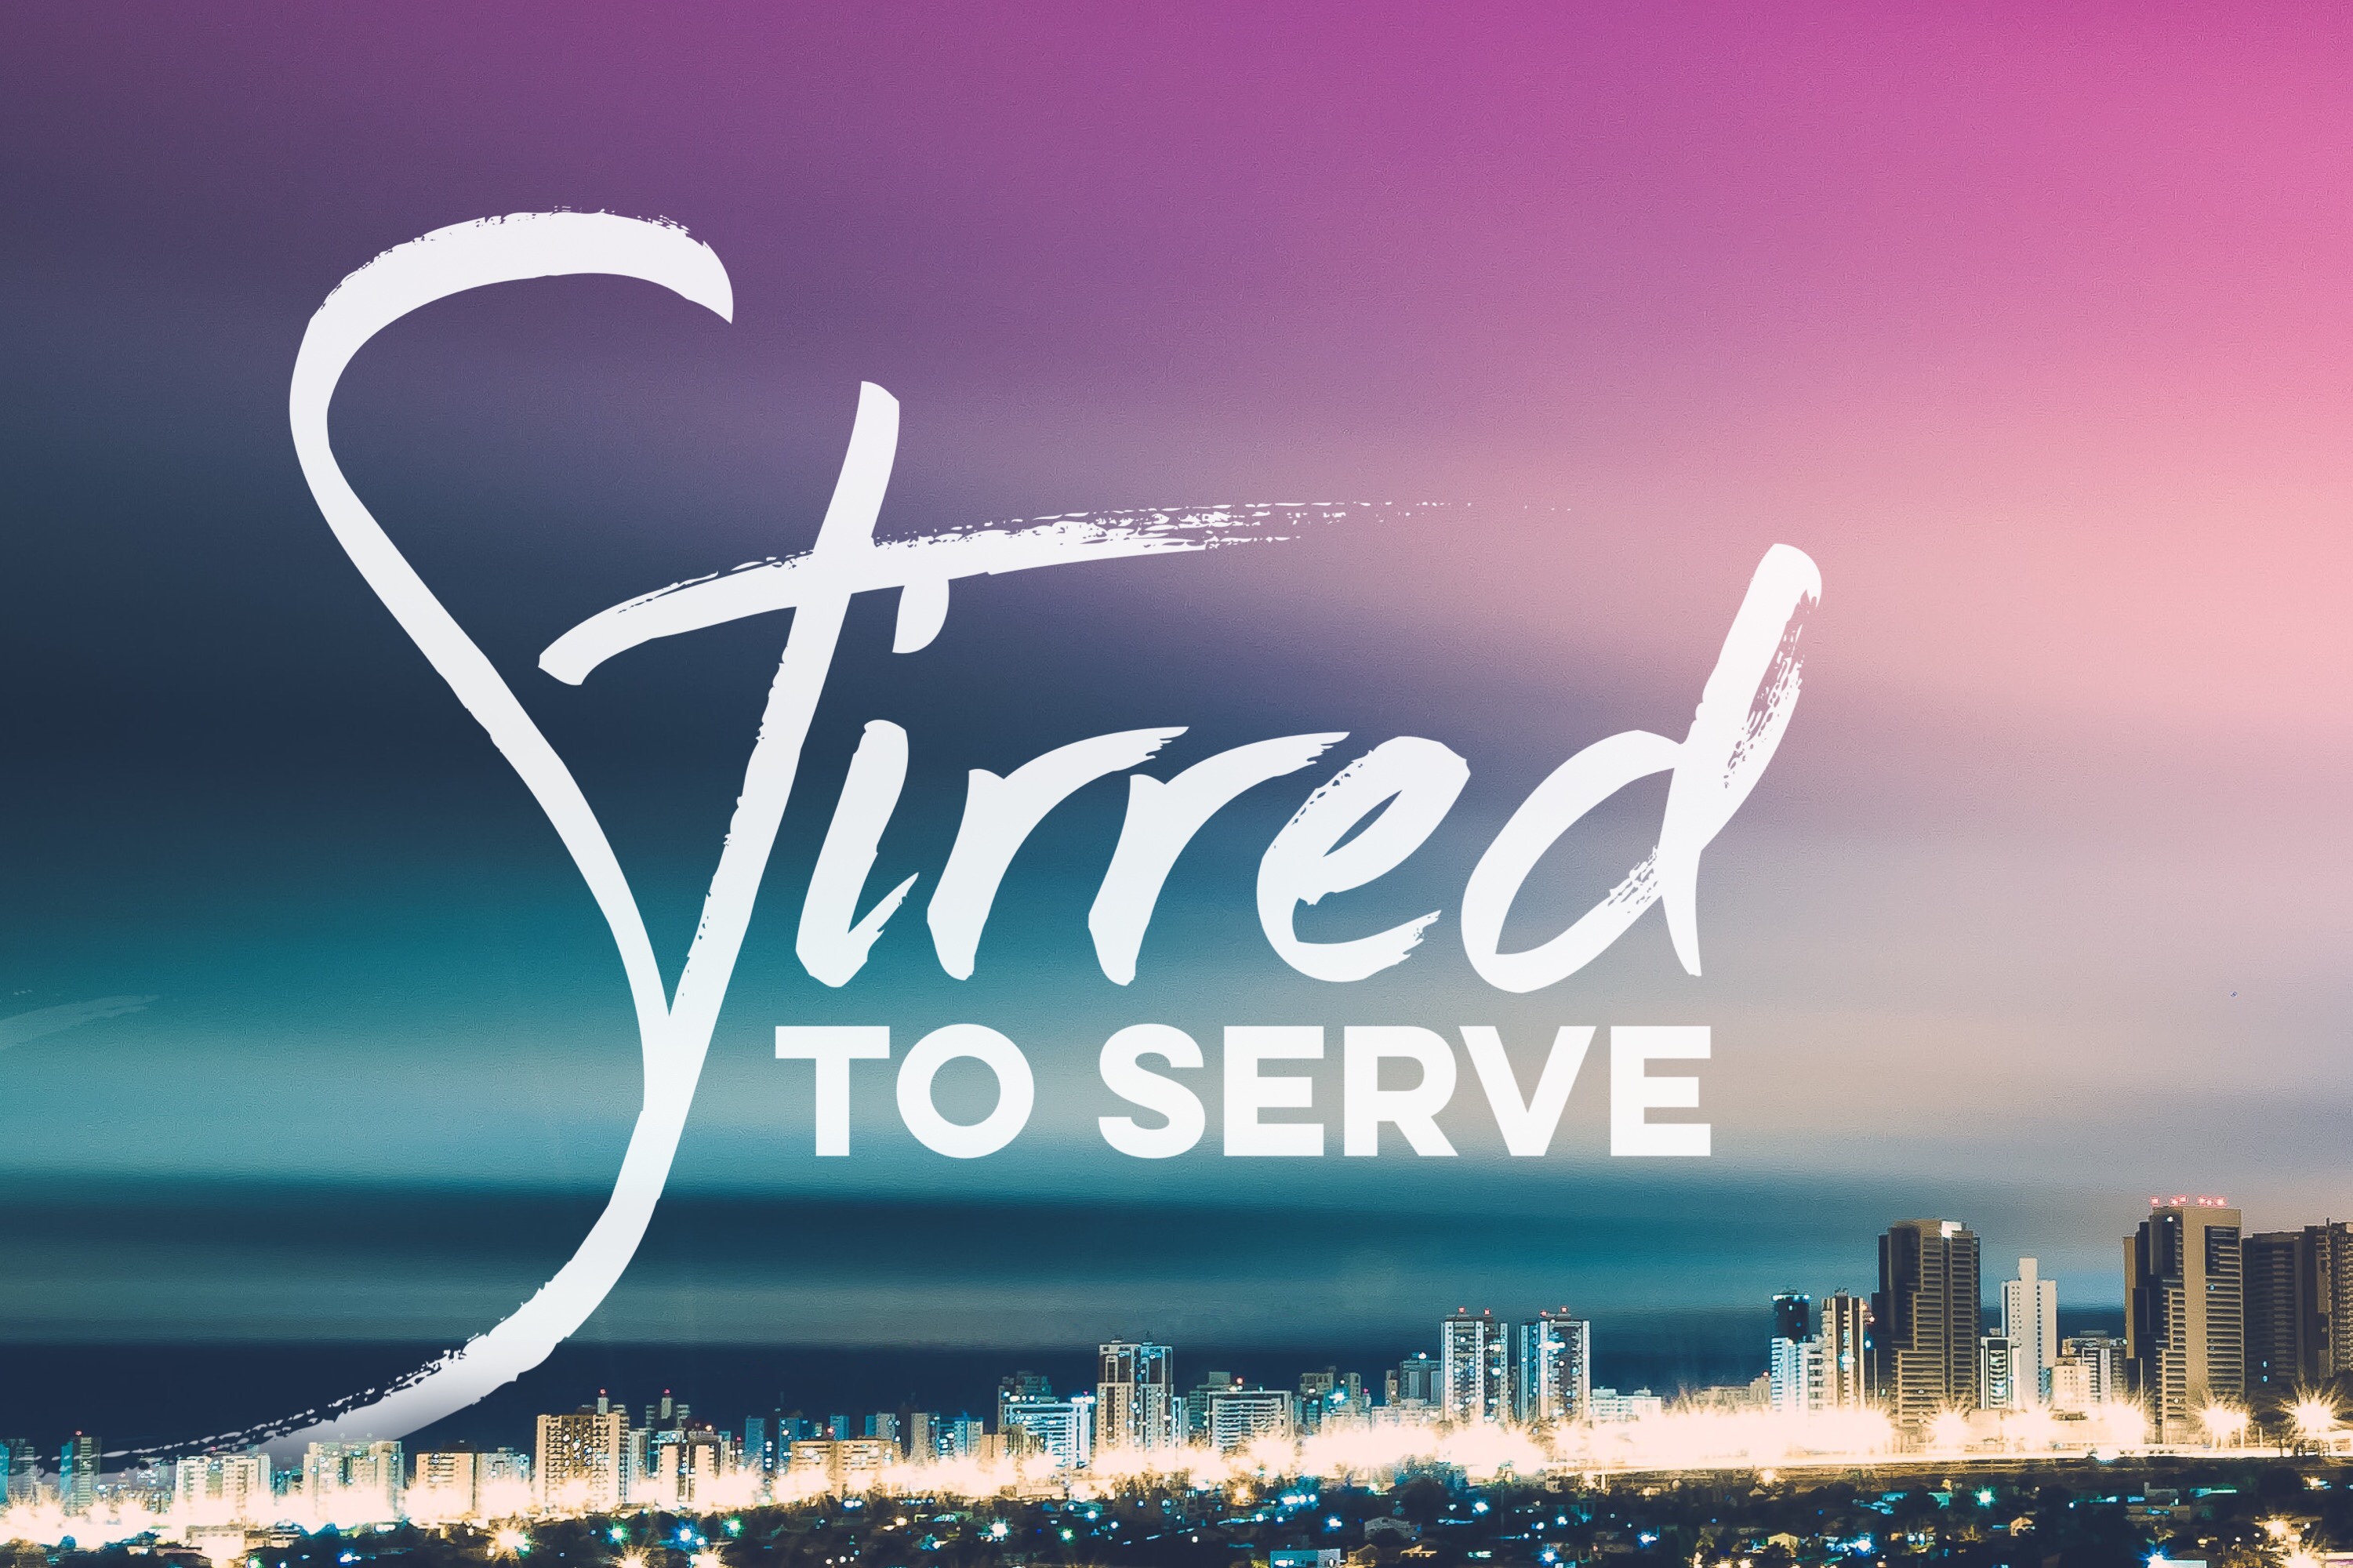 Stirred to Serve: The Power of the Gospel